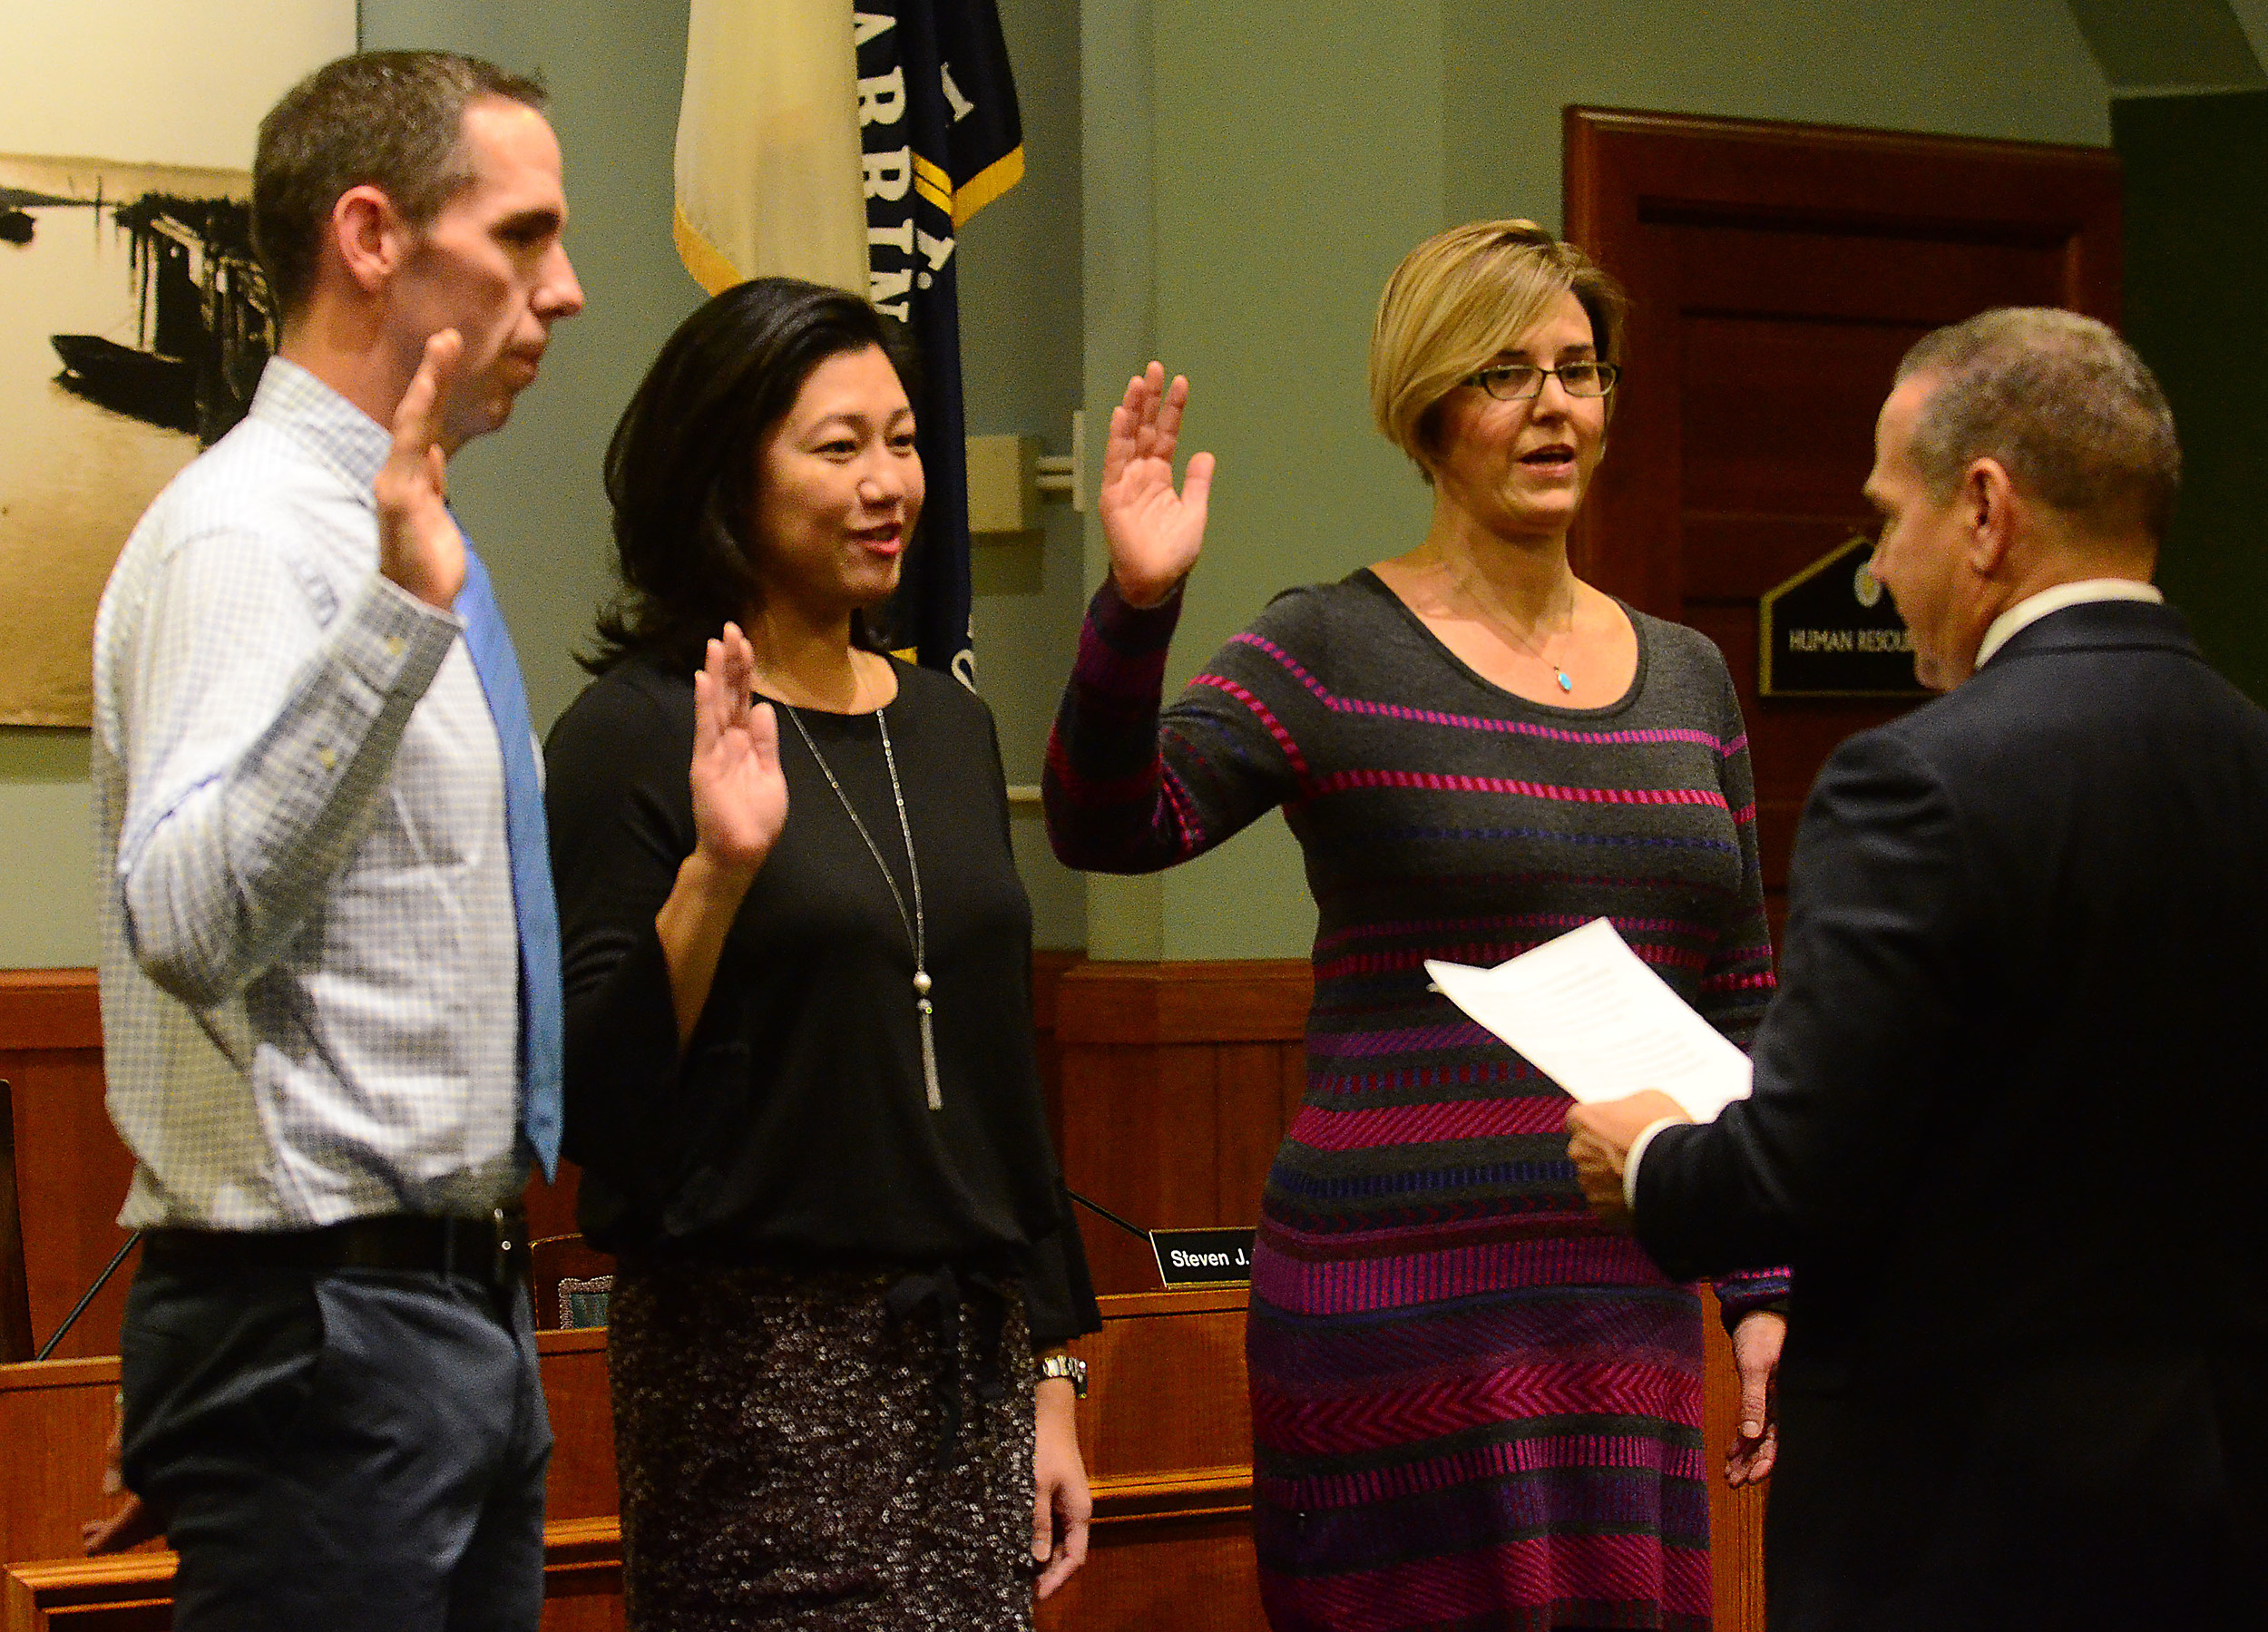 U.S. Congressman David Cicilline (right) administers the oath of office to Barrington School Committee members (from left to right) Patrick McCrann, Gina Bae and Erika Sevetson last year. Mr. McCrann voted against taking the school suspension fight to Superior Court, but the full committee voted 4-1 to proceed forward.